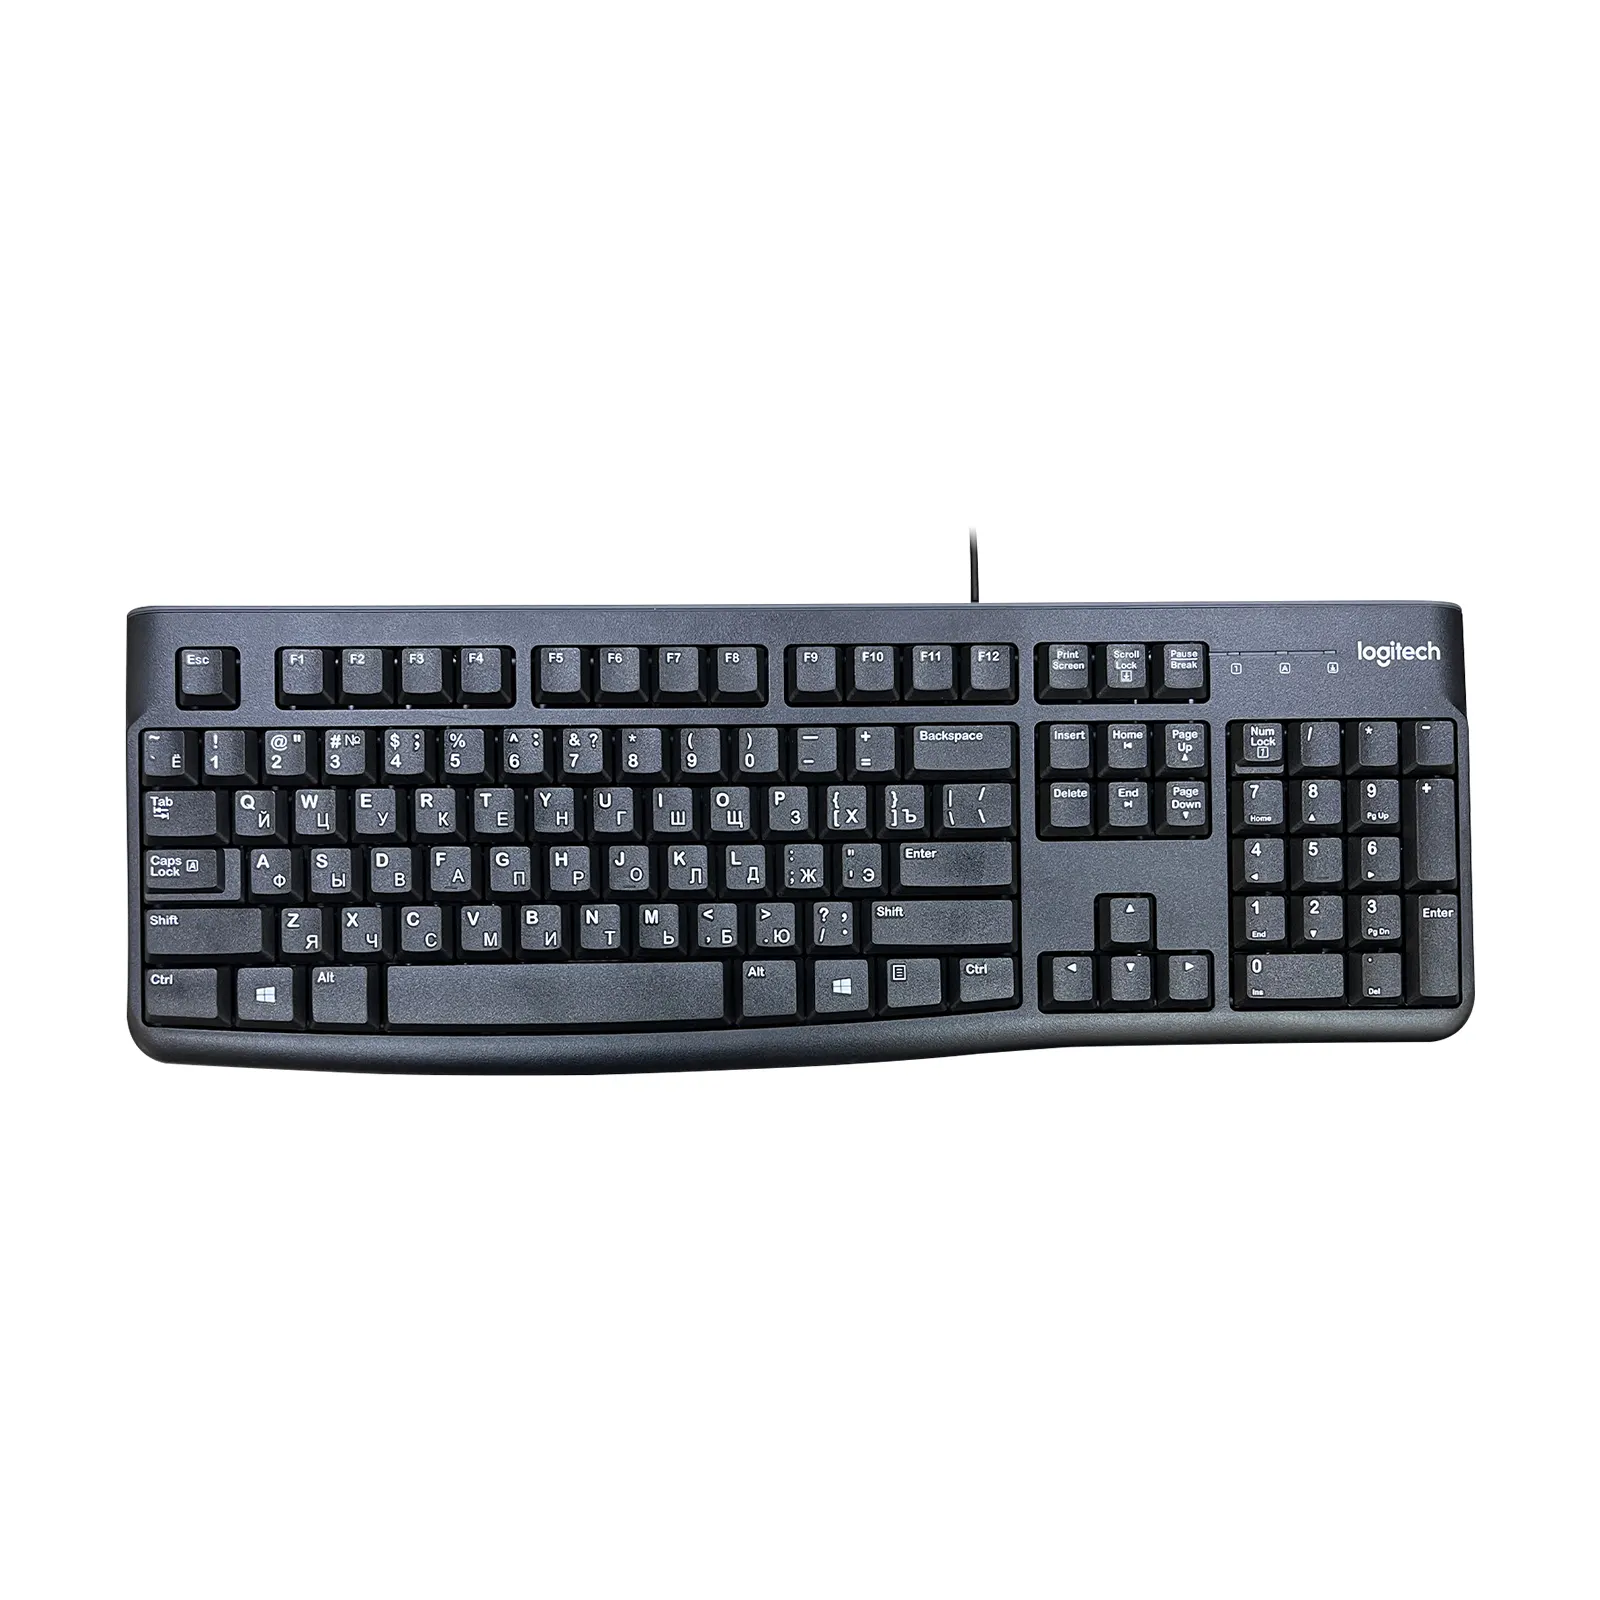 Logitech K120 MK270 wired keyboard with standard layout, full size F key and numeric keypad can be customized in any language